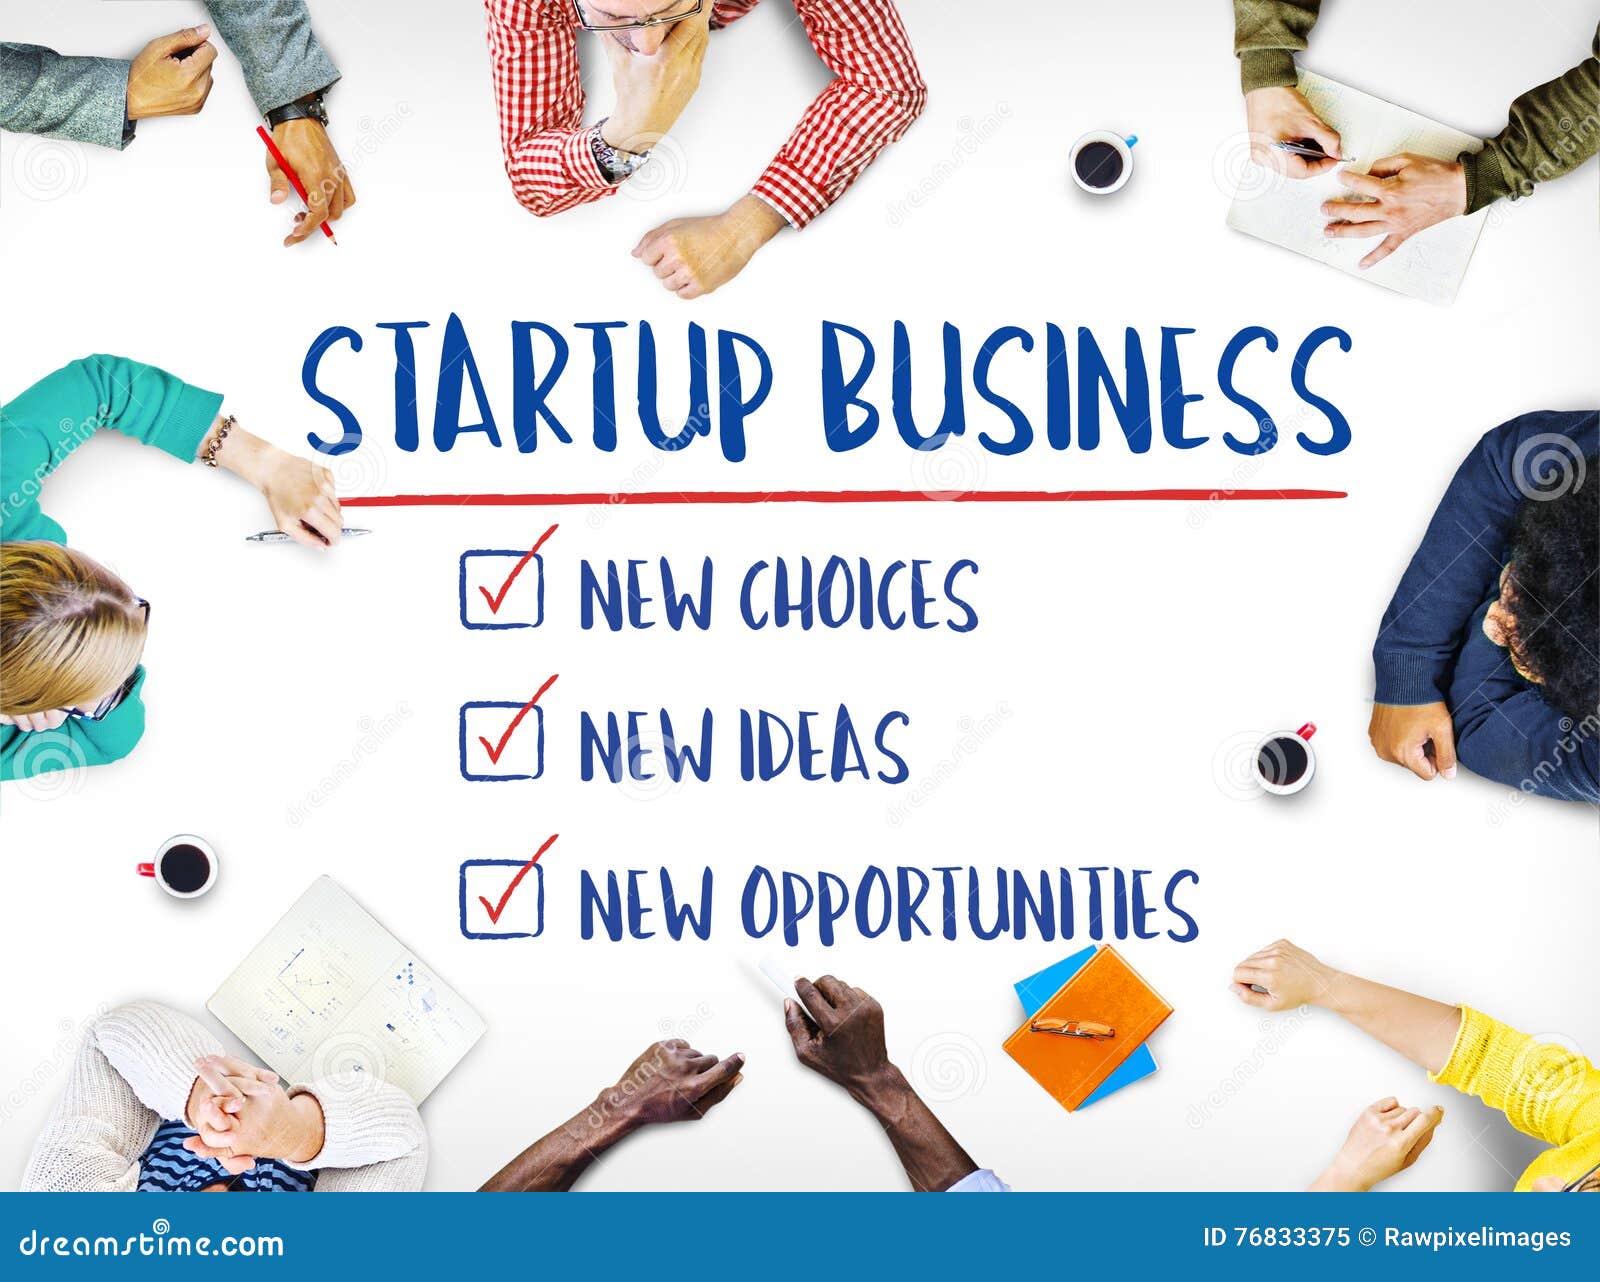 new startup business opportunities ideas concept